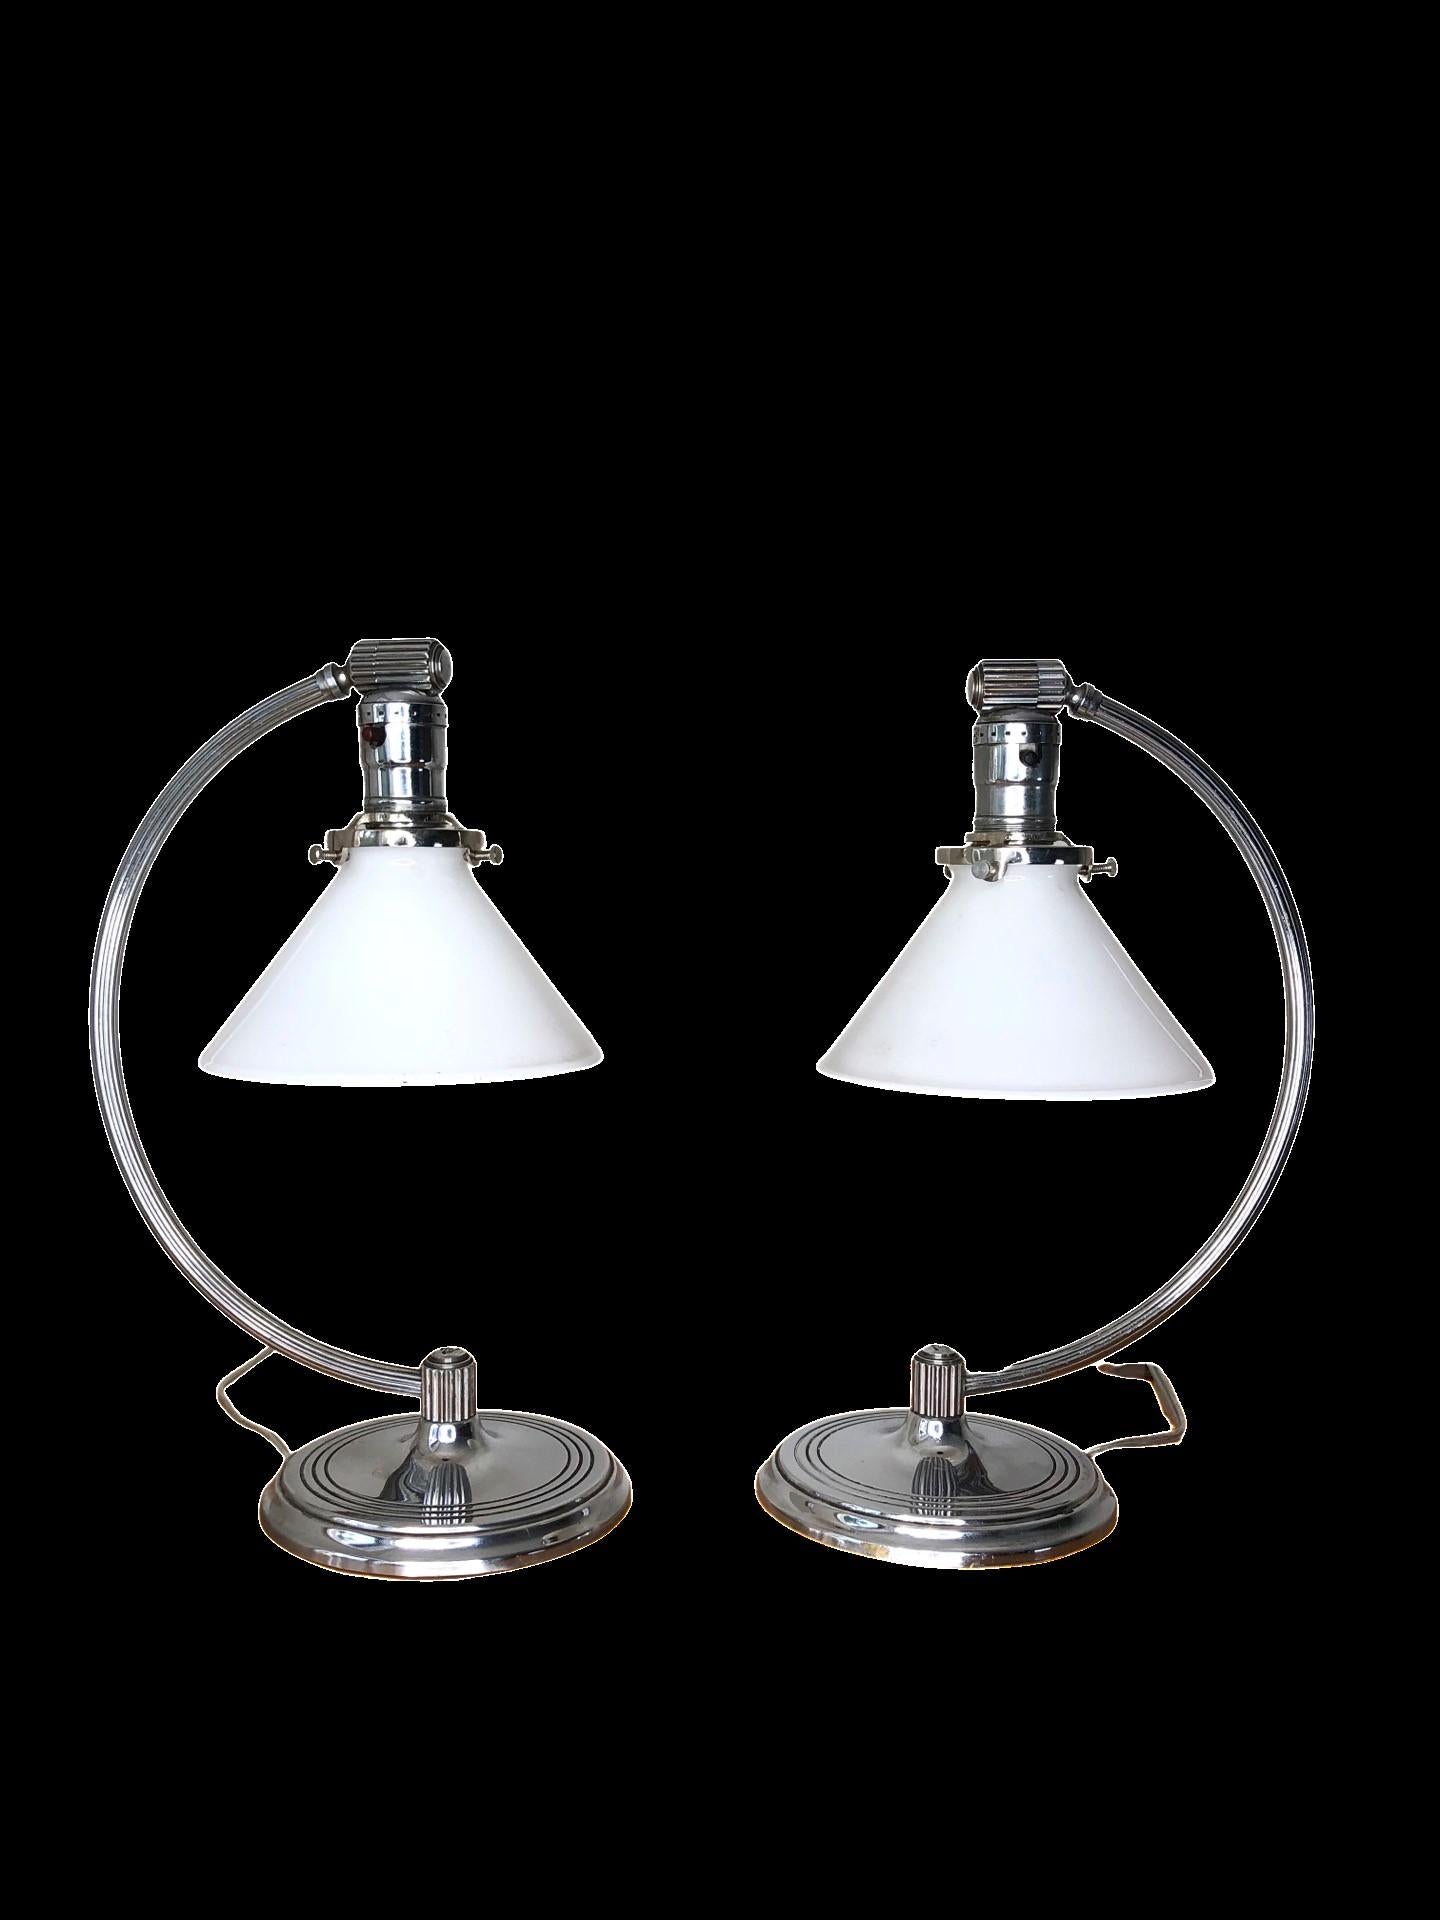 Pair of Chase Chrome Art Deco Desk Lamps For Sale 2